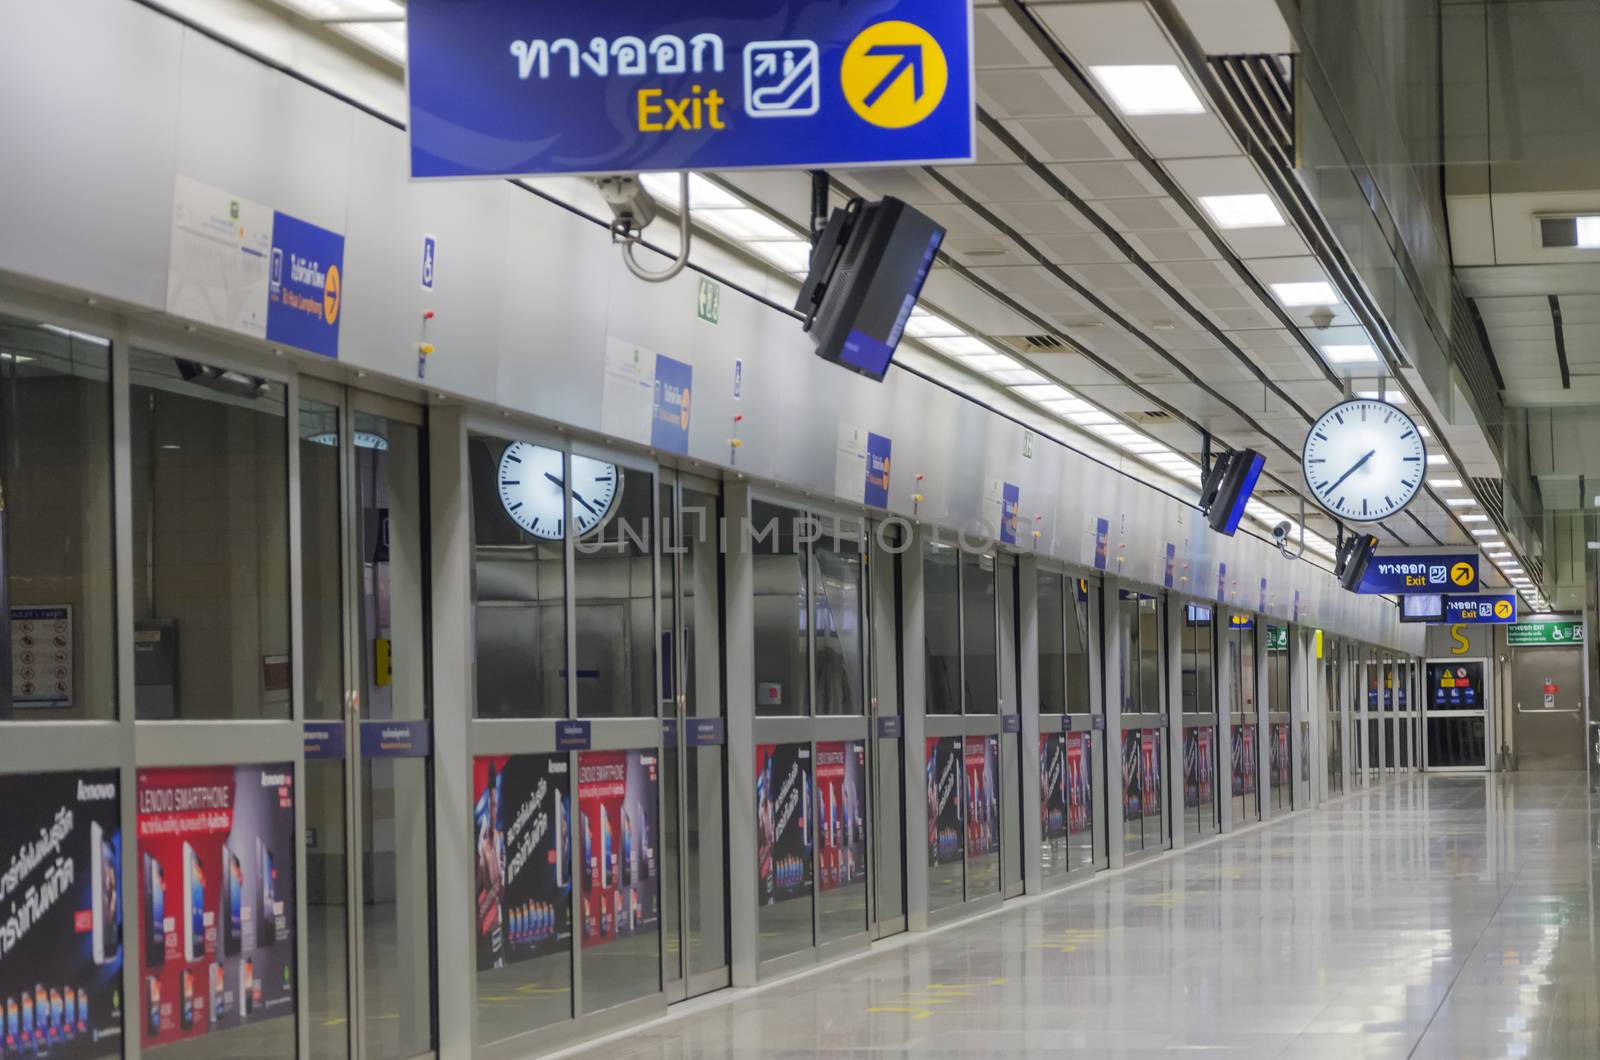 BANGKOK - JULY 18: night on an empty metro (MRT) station on JULY 18, 2014 in Bangkok, Thailand. The MRT serves more than 240,000 passengers each day.